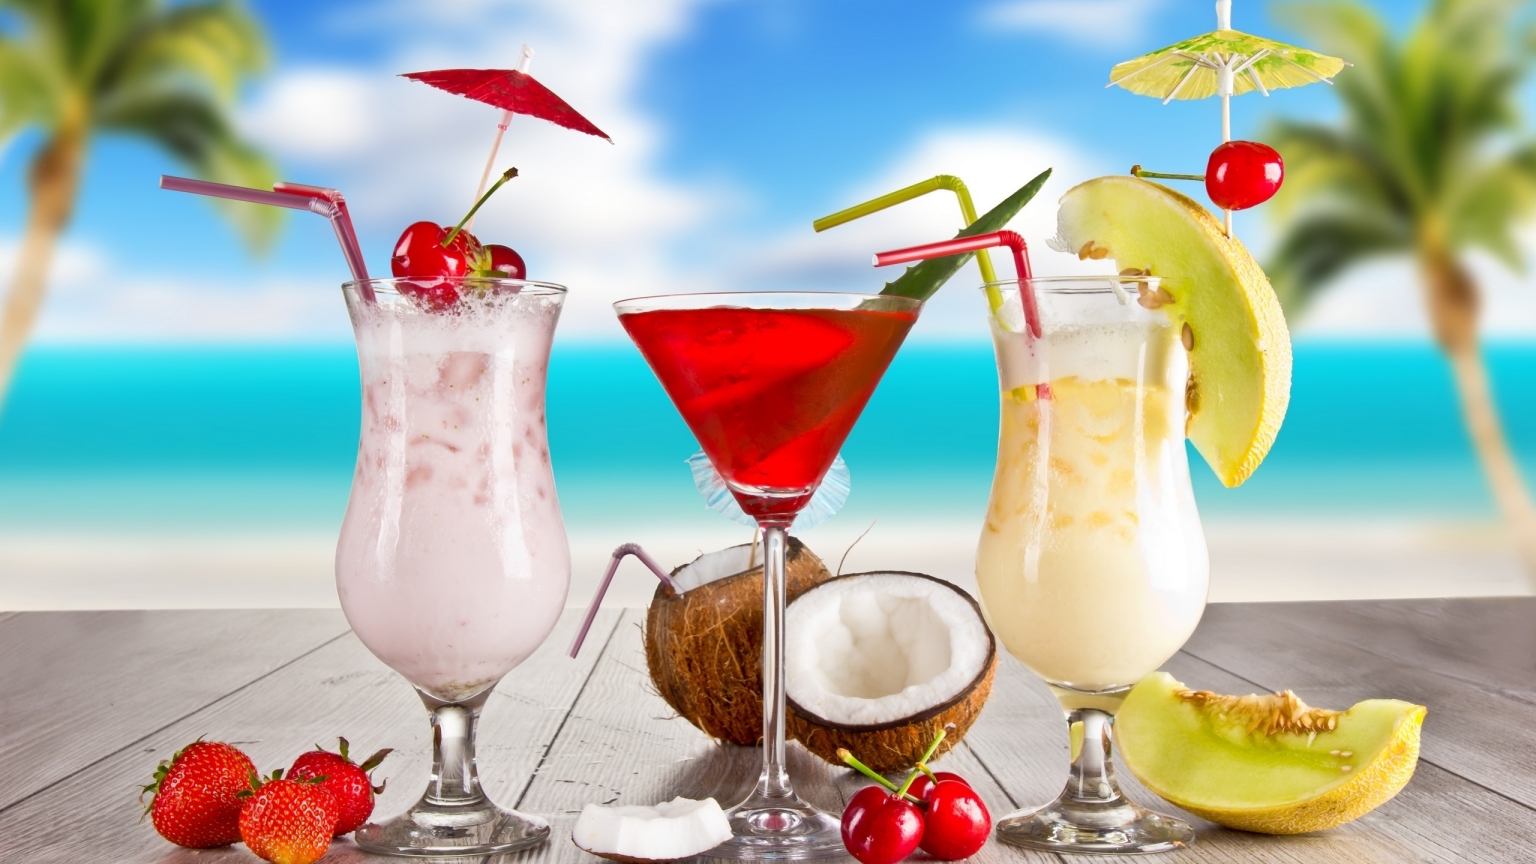 Exotic Summer Cocktails for 1536 x 864 HDTV resolution